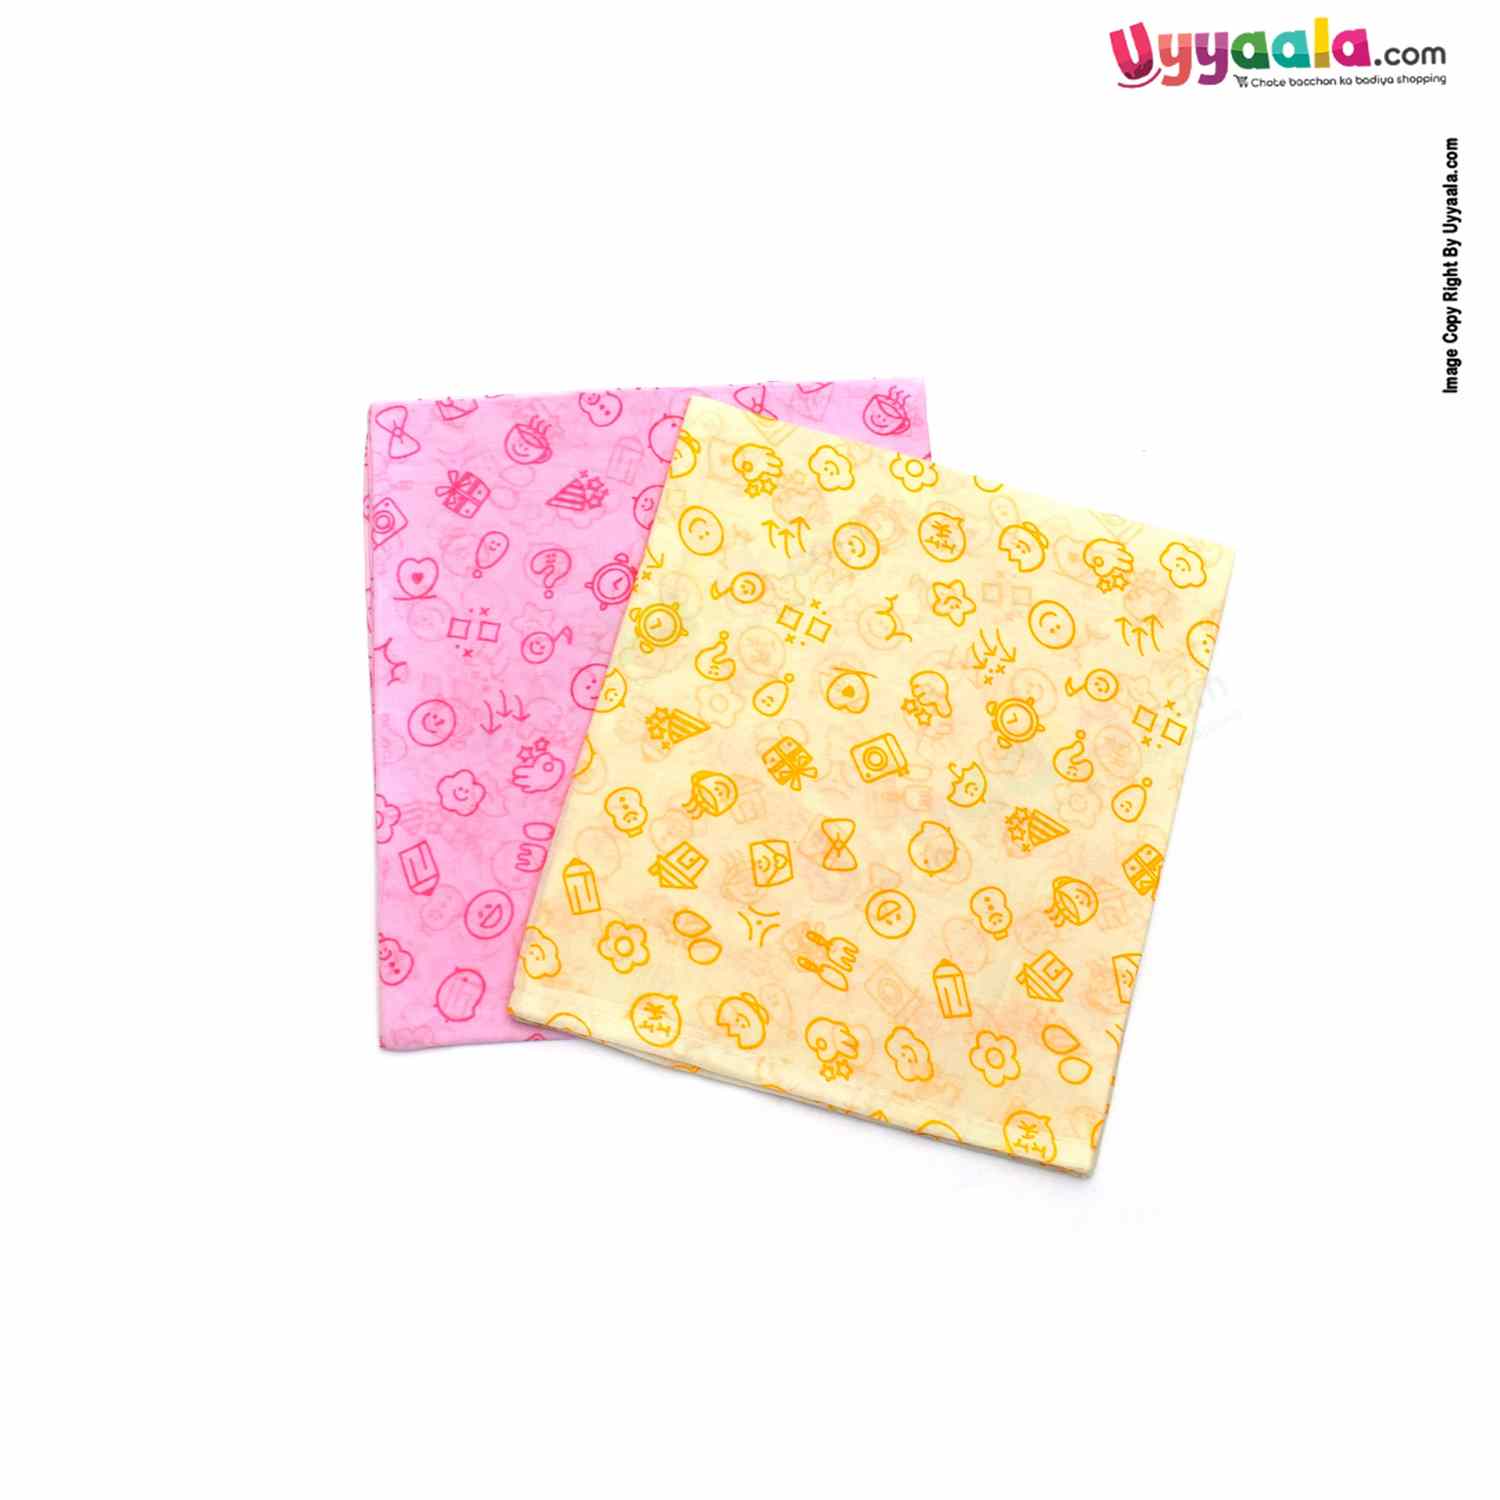 Cotton Wrapper Muslin Cloth With Smiley & Star Print Pack of 2, 0+m Age, Yellow & Pink